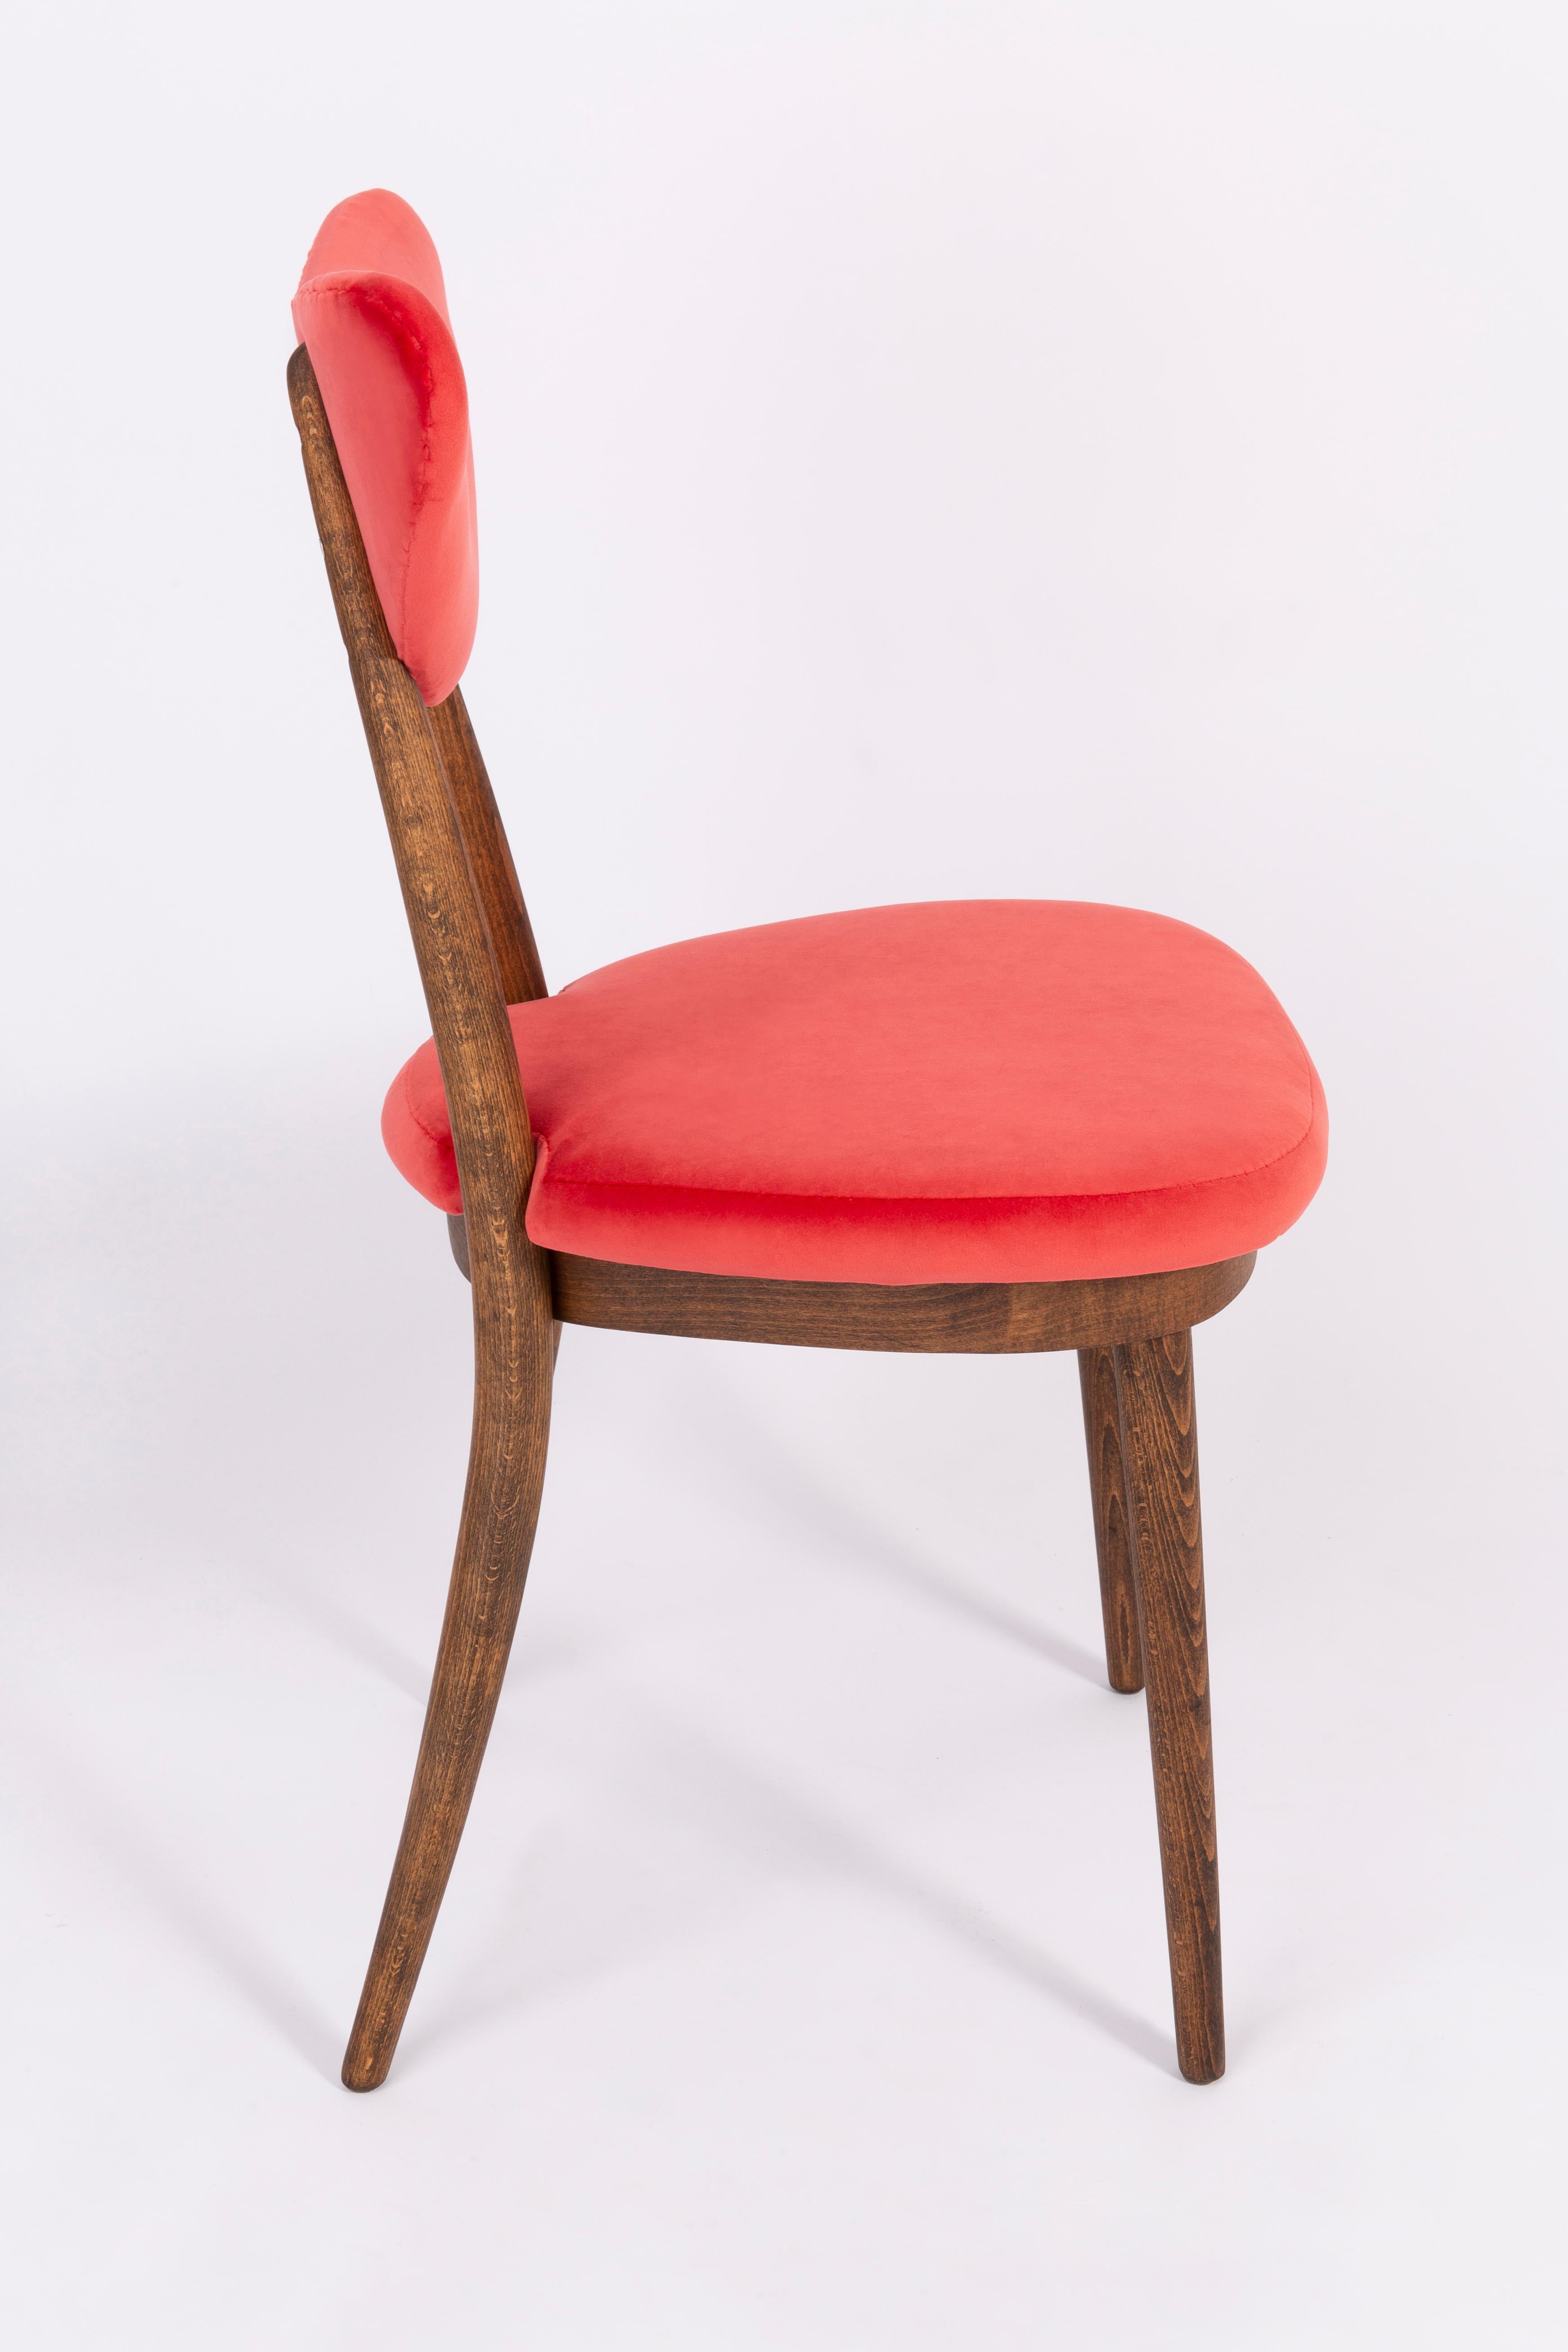 Set of Eight Red Heart Chairs, Poland, 1960s For Sale 4